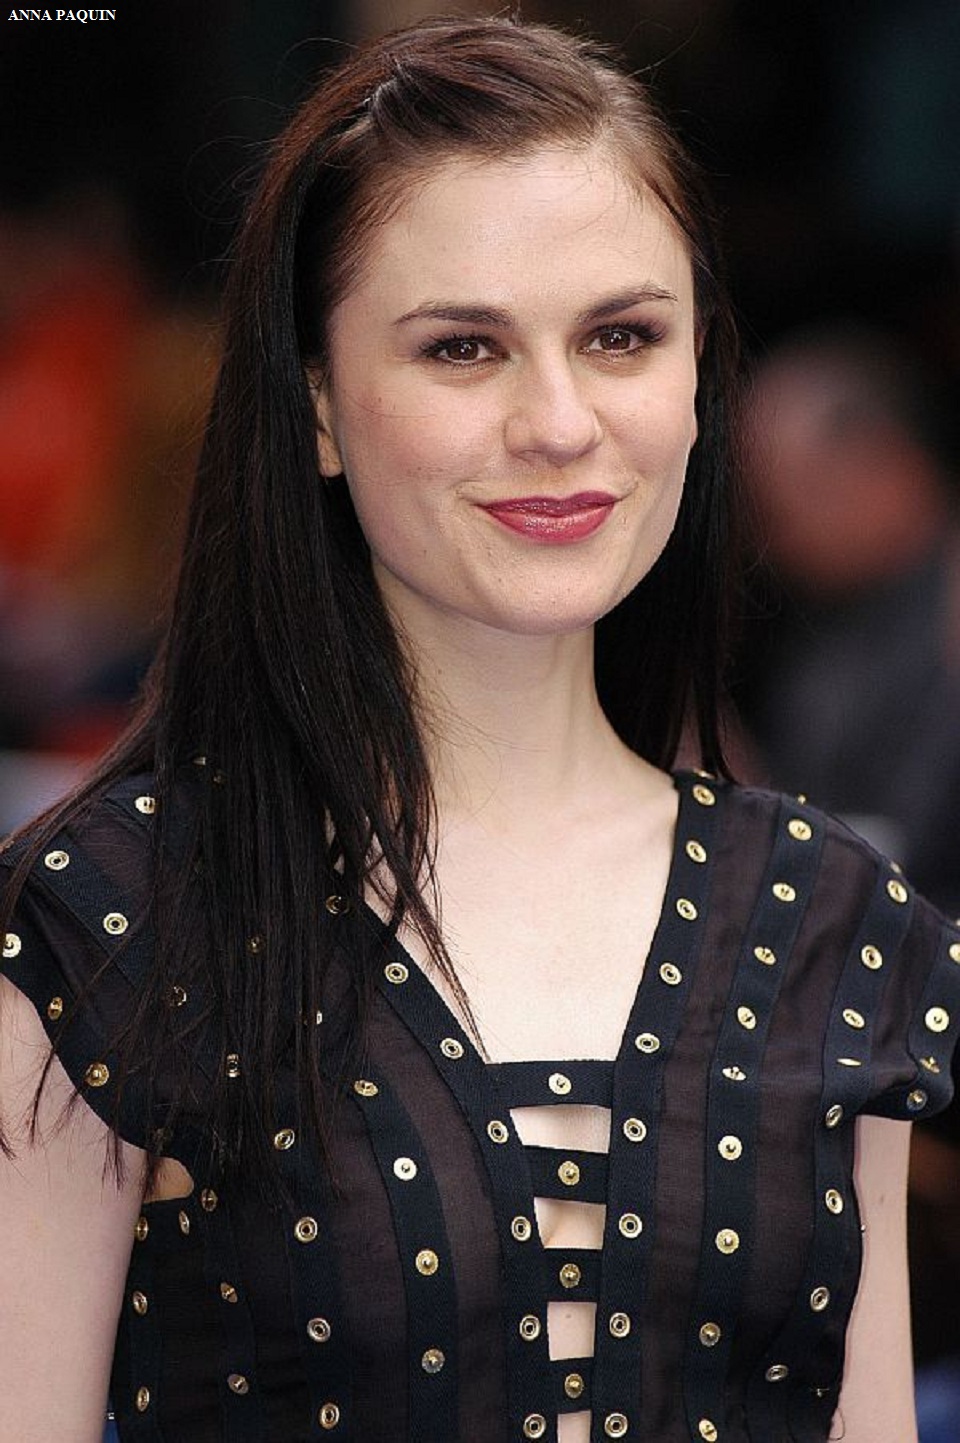 Naked Anna Paquin Added By Bot